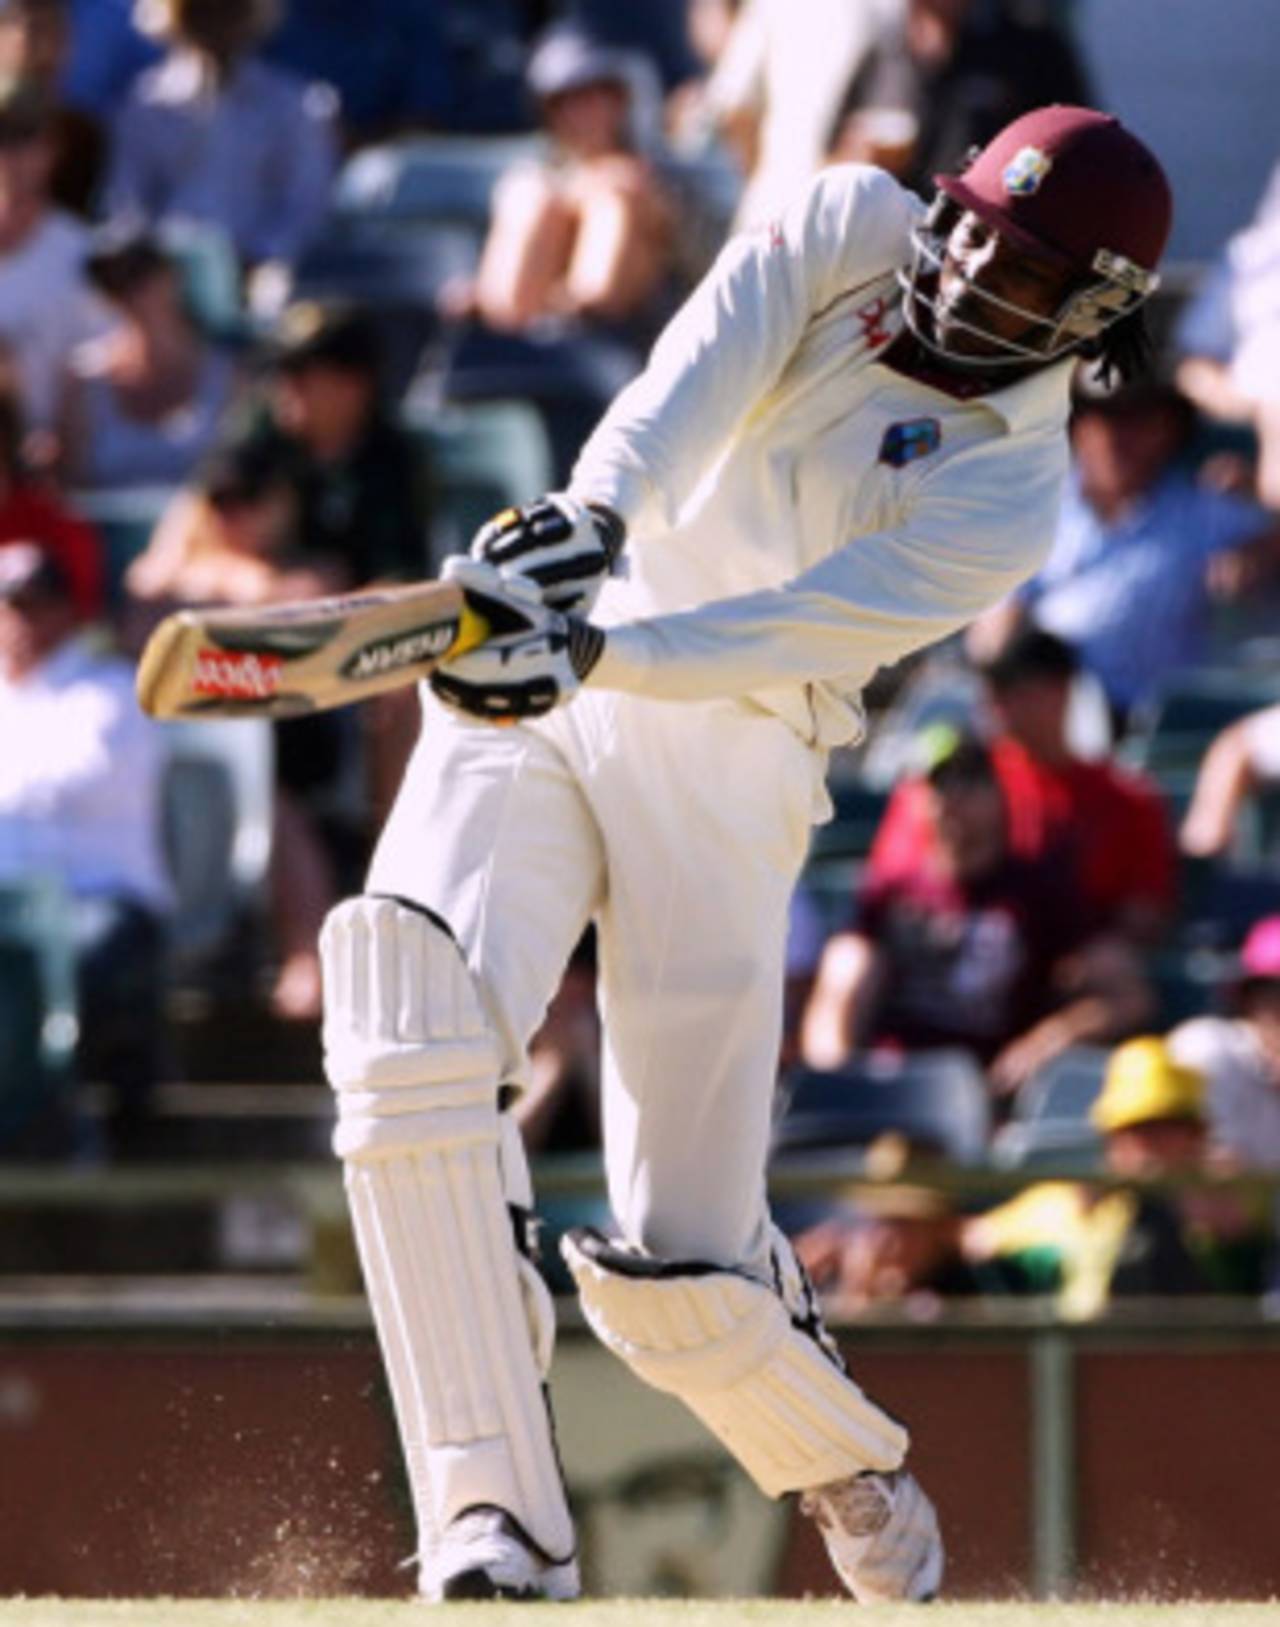 Chris Gayle shows his amazing power, Australia v West Indies, 2nd Test, Perth, 17 December, 2009